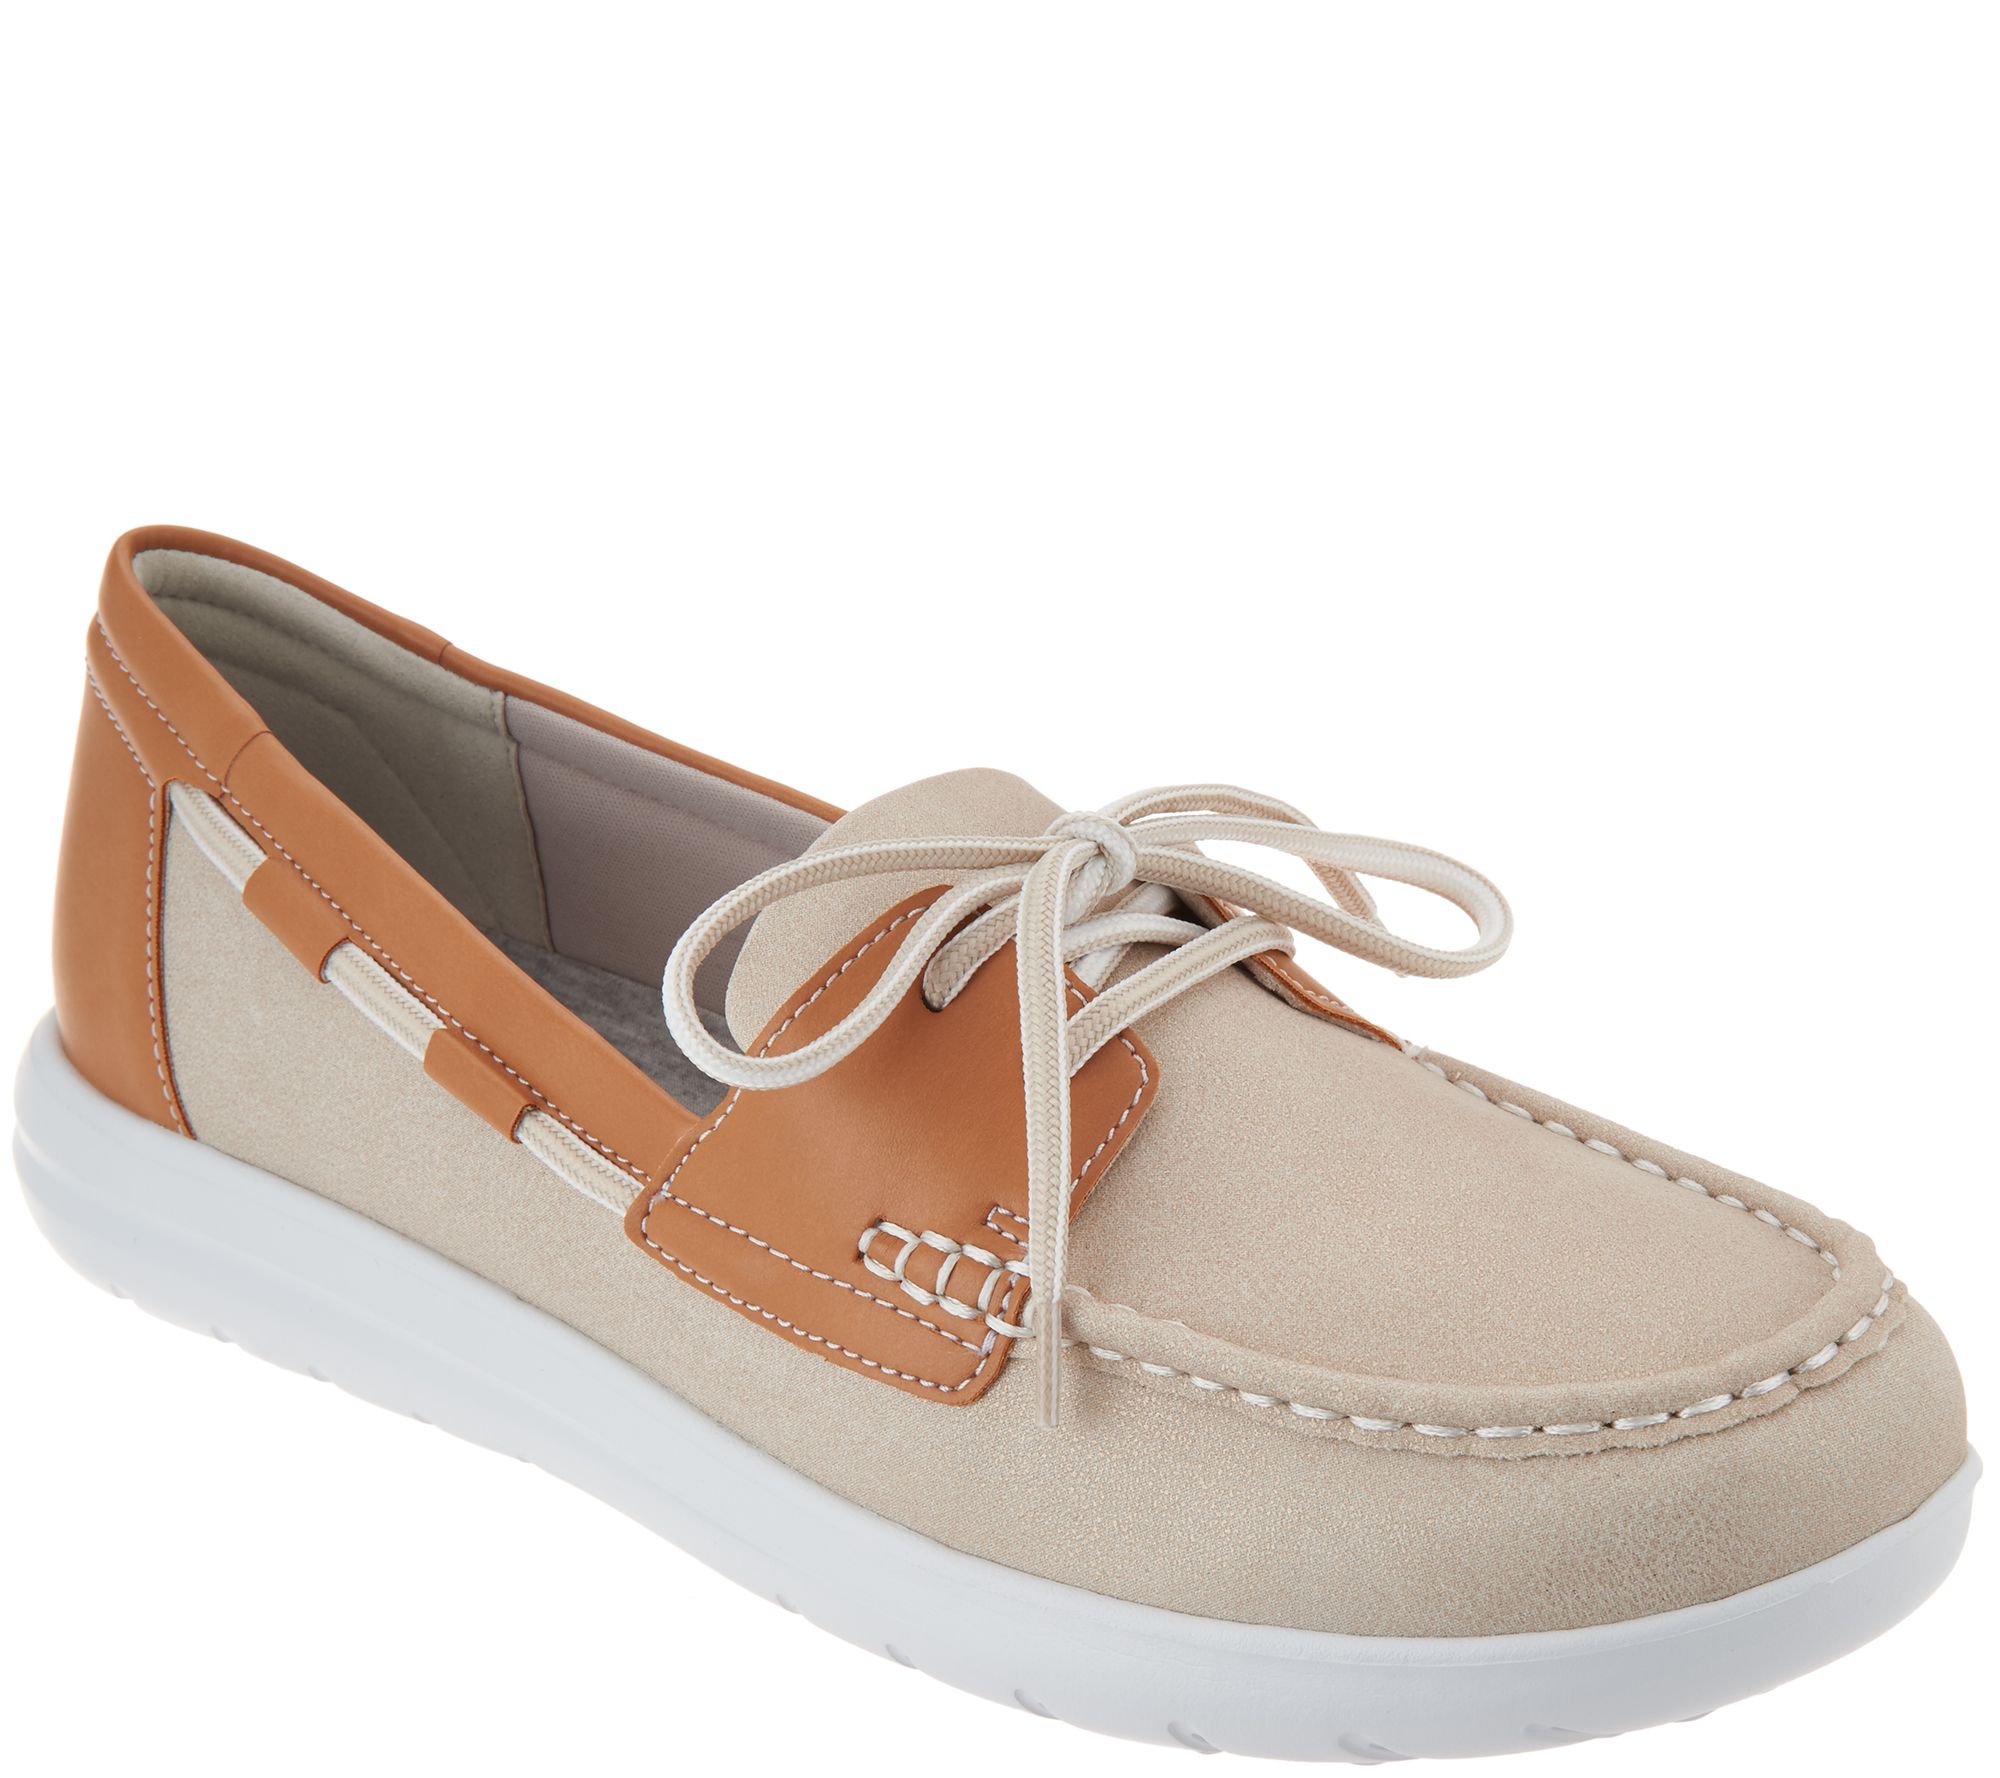 cloudsteppers boat shoes